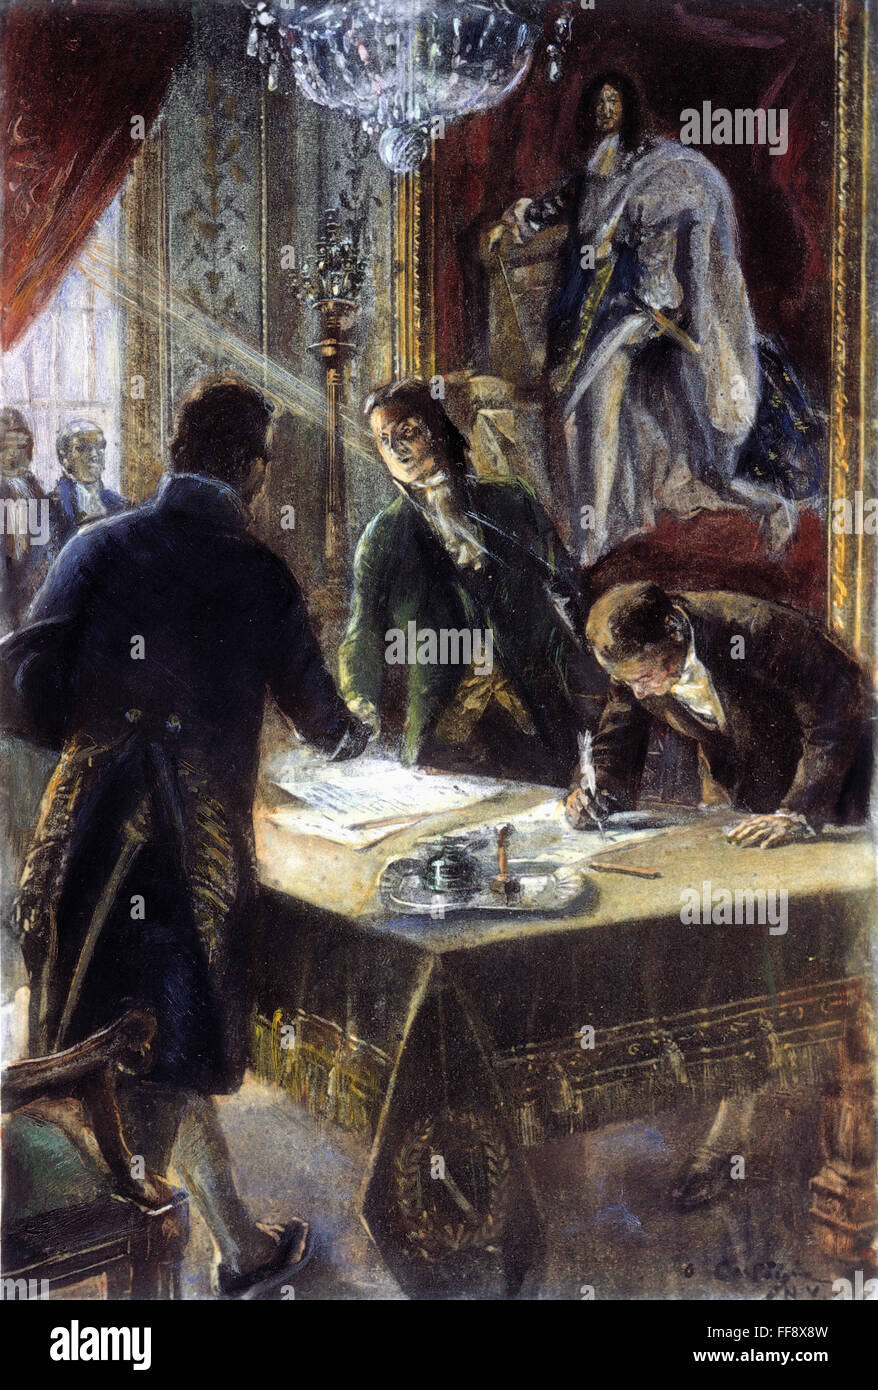 LOUISIANA PURCHASE, 1803. /nThe signing of the Louisiana Purchase by (left to right) Marquis Franτois de Barbe-Marbois, Robert Livingston, and James Monroe in Paris, 30 April 1803. Line engraving, 1904, after a drawing by AndrΘ Castaigne. Stock Photo